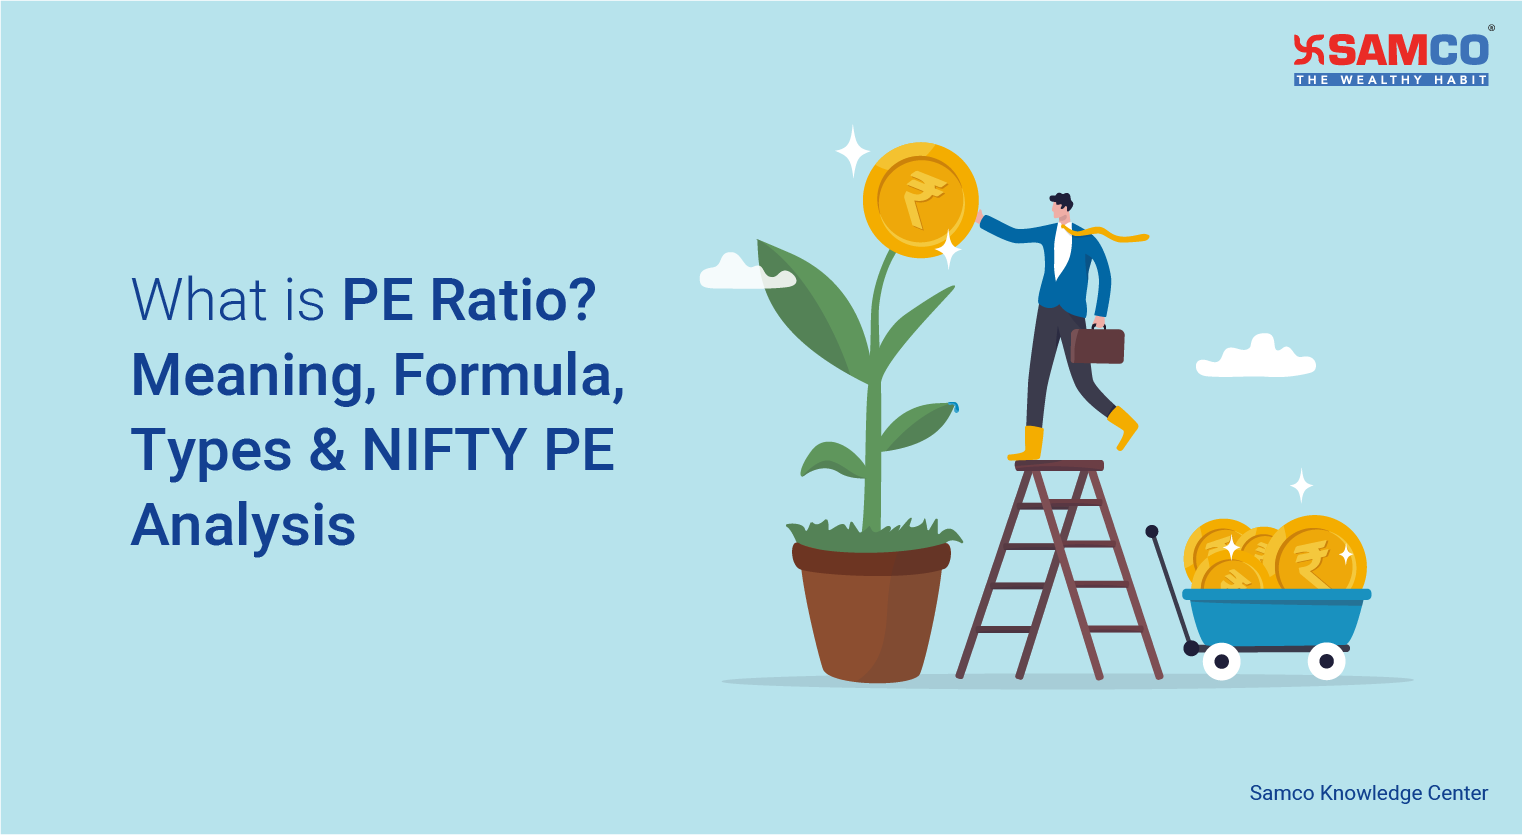 What is PE Ratio? Meaning, Formula, Types & NIFTY PE Analysis